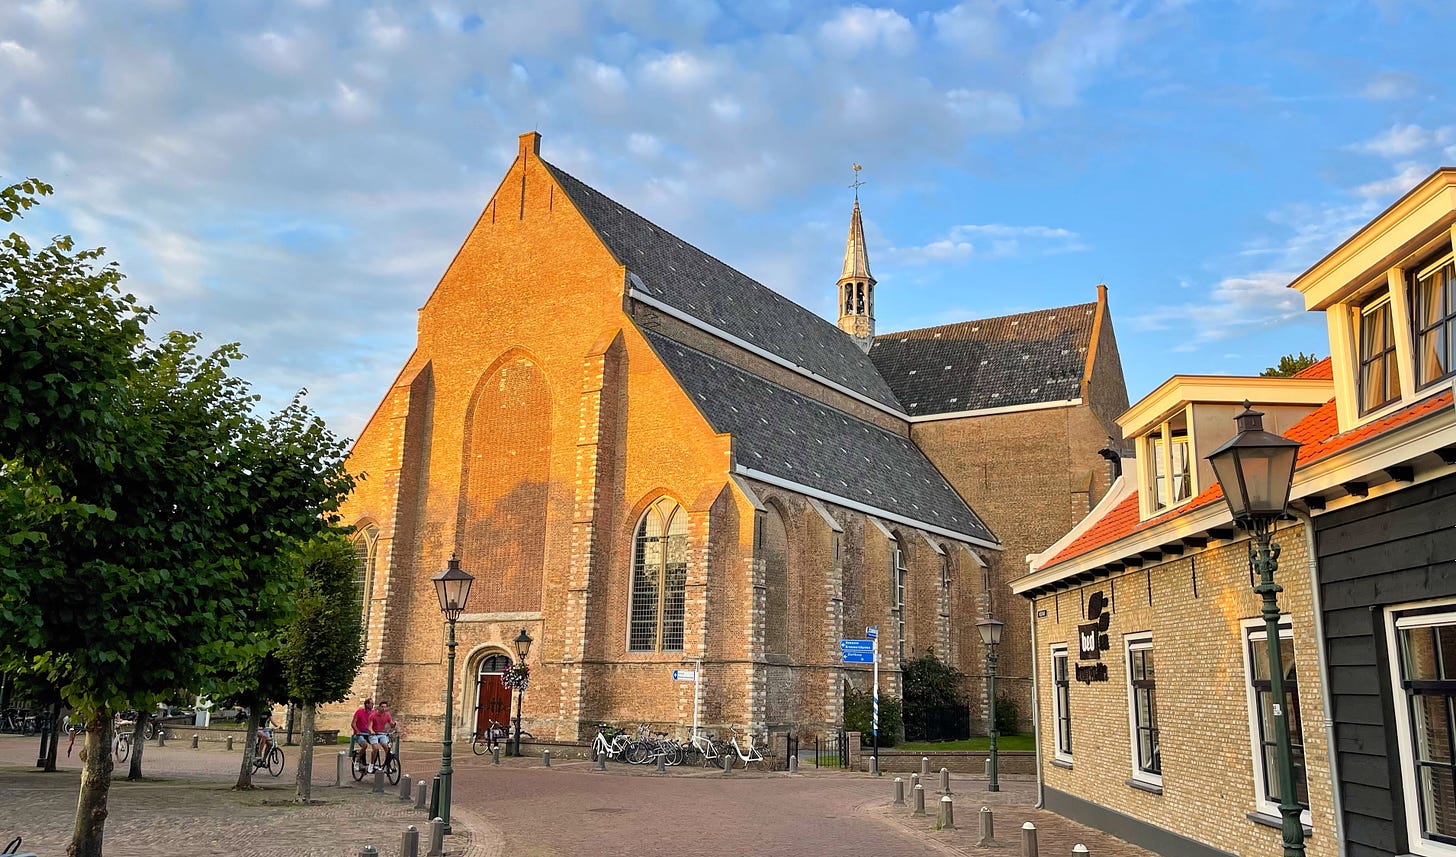 photo of the church of Haamstede taken by Alexander Verbeek for The Planet newsletter